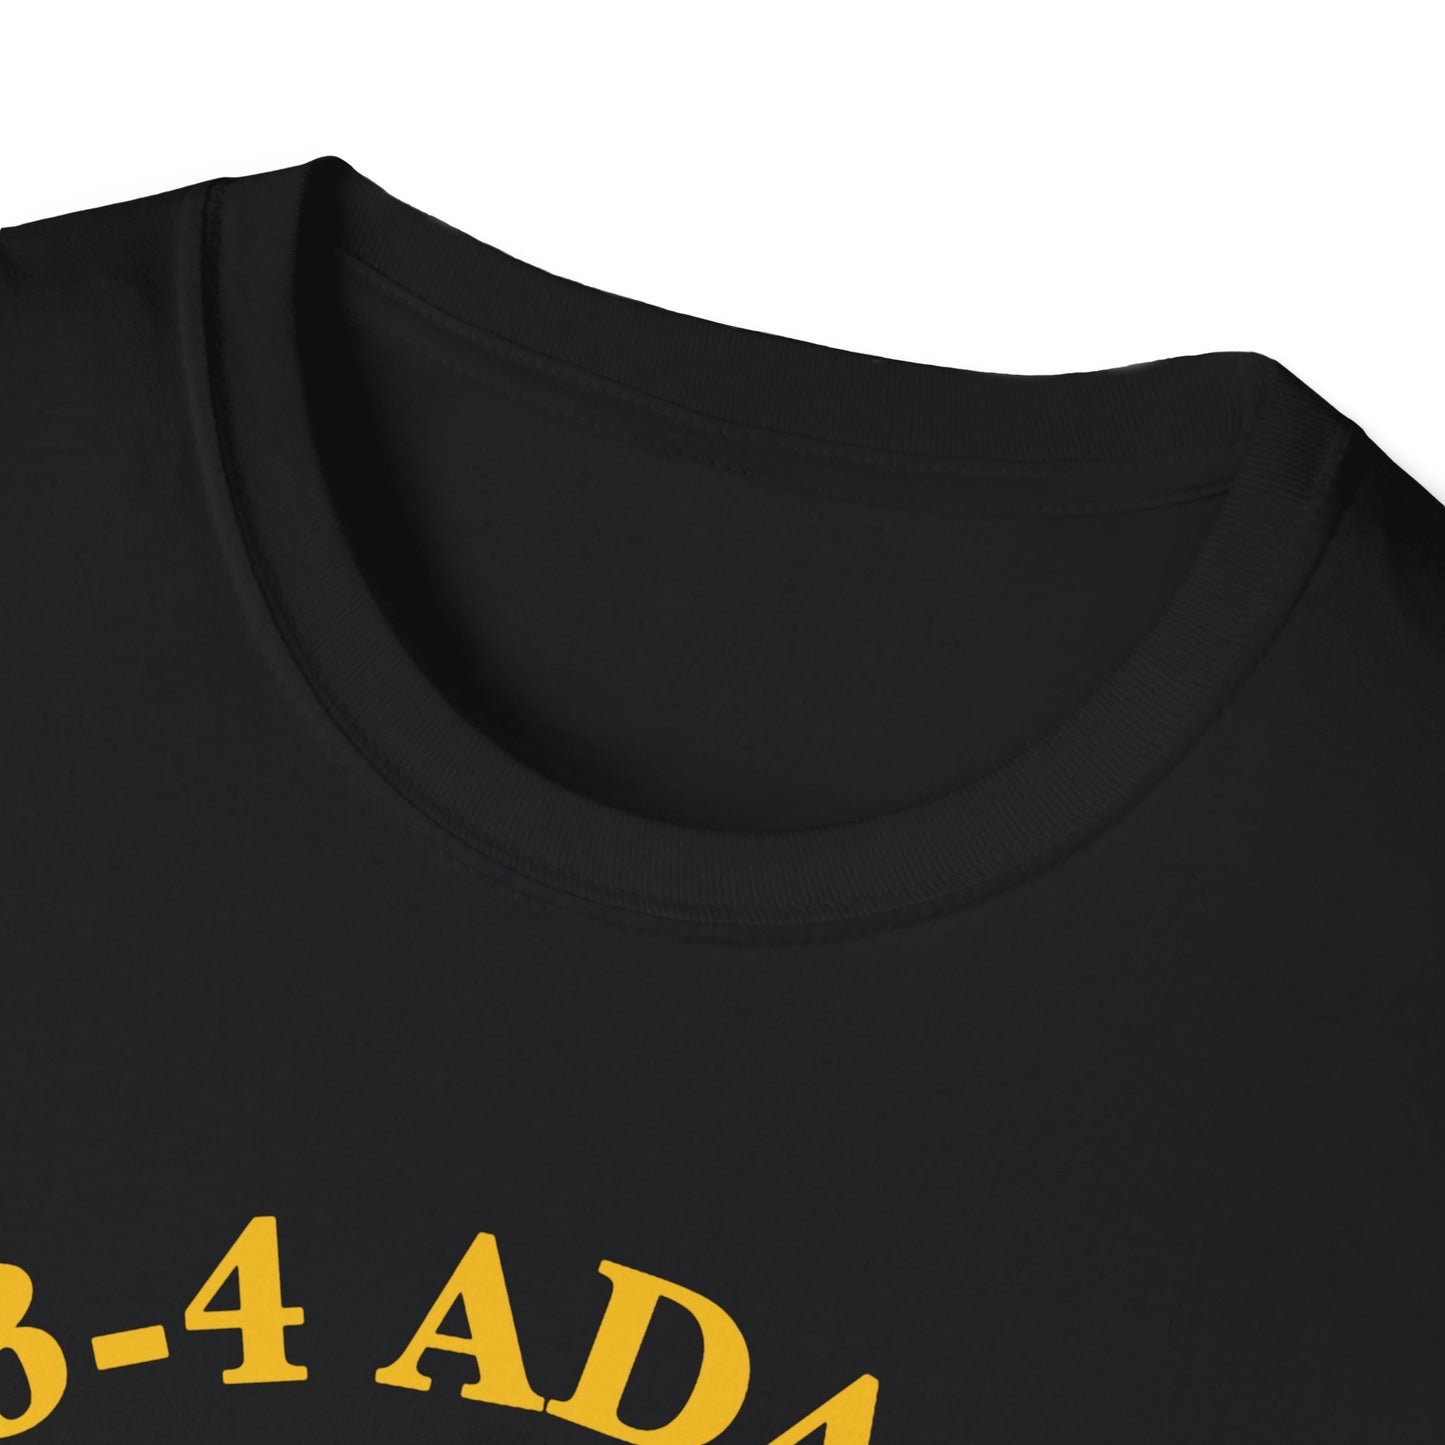 3-4 ADAR Classic Black and Gold Marshall Design Unisex Softstyle T-Shirt